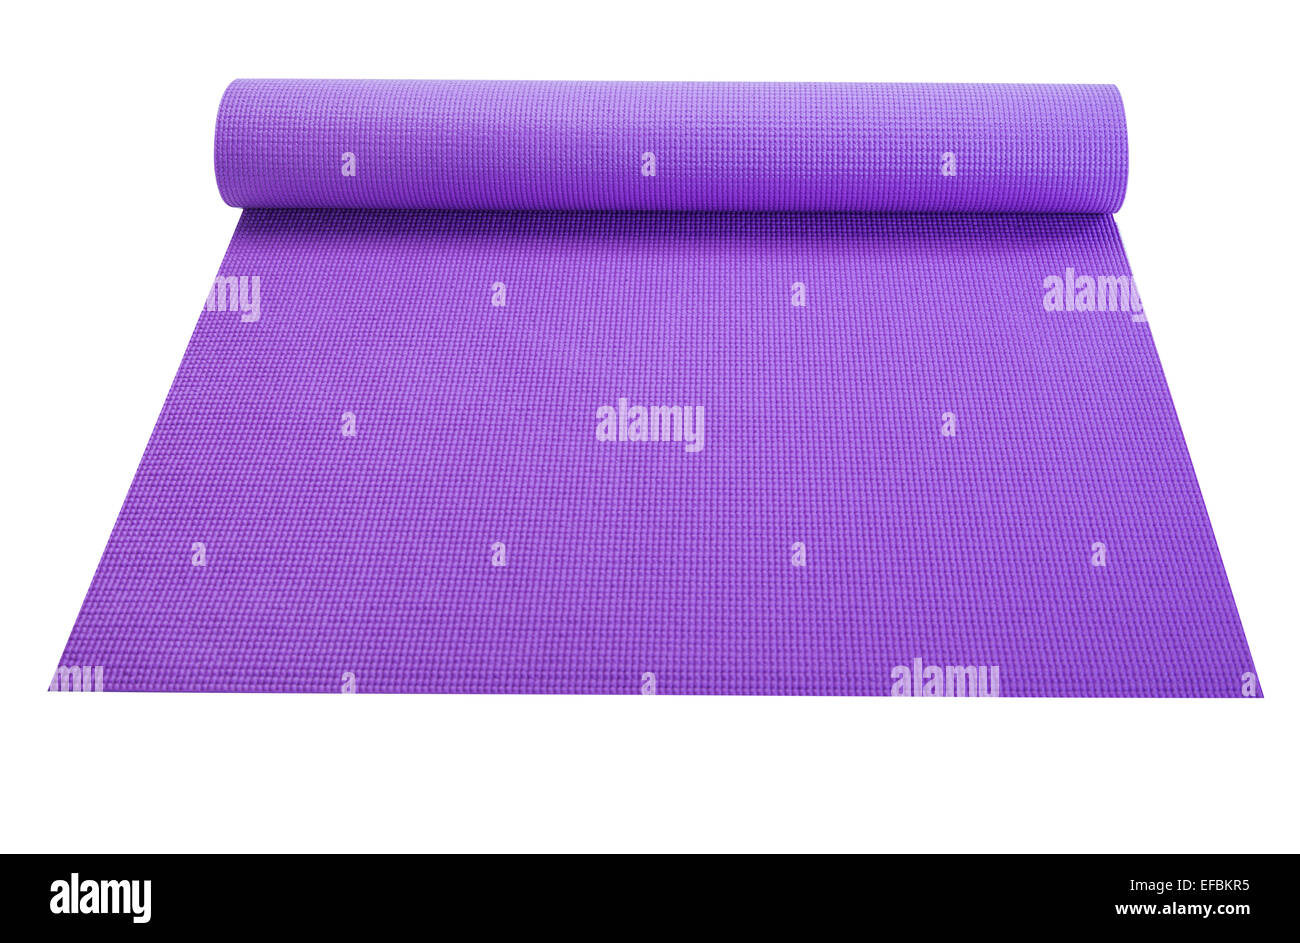 Roll out mats for workout and aerobics Stock Photo